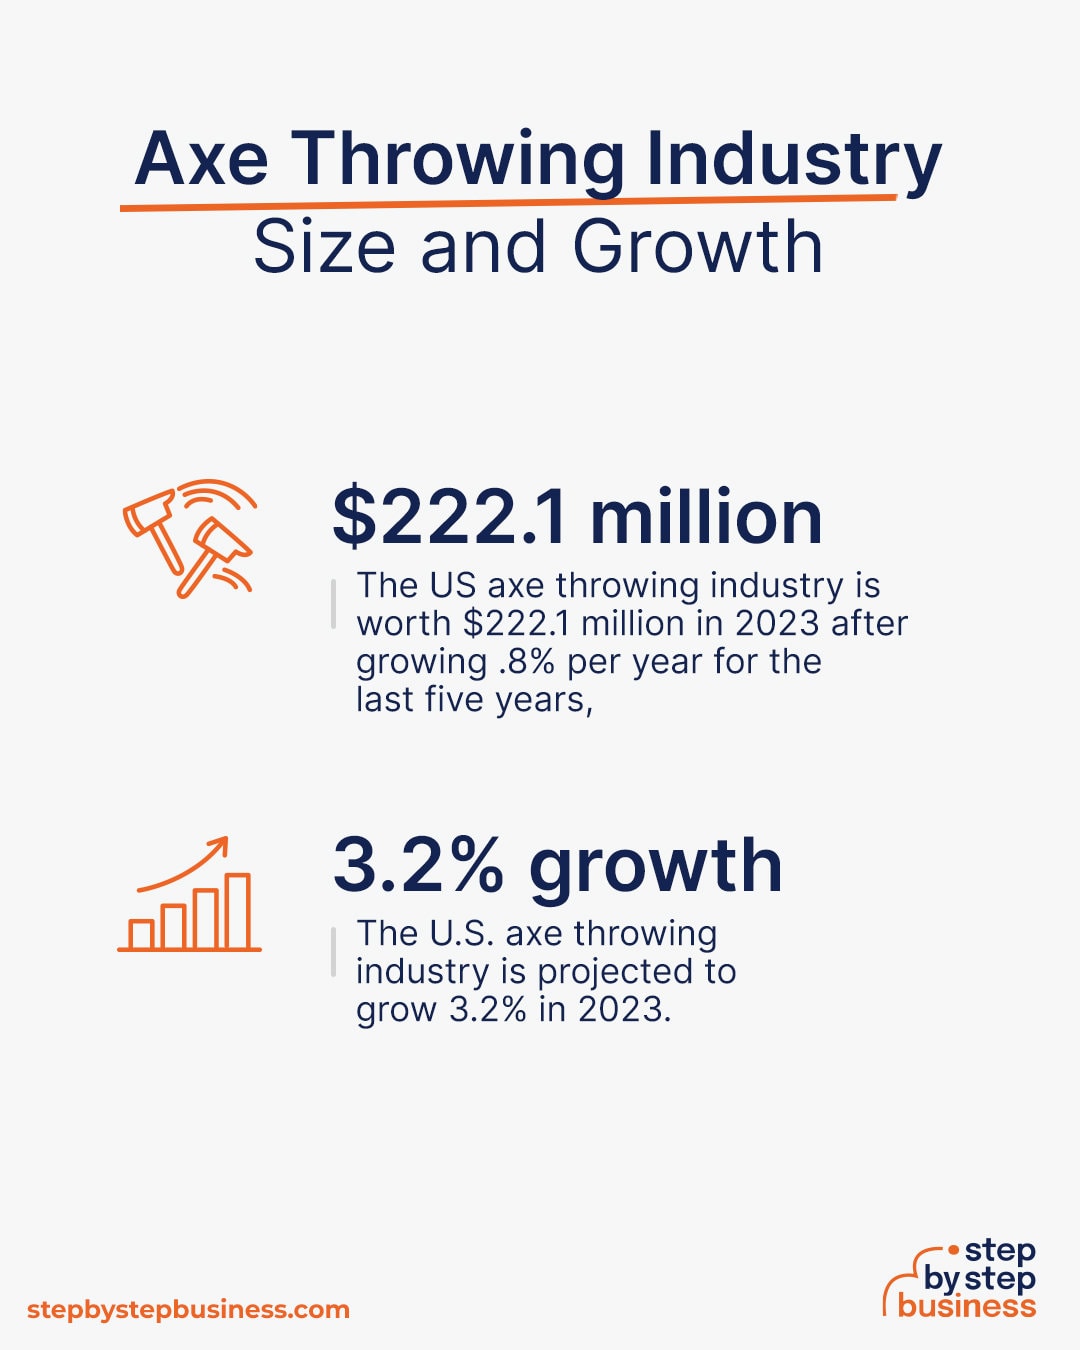 Axe Throwing industry size and growth